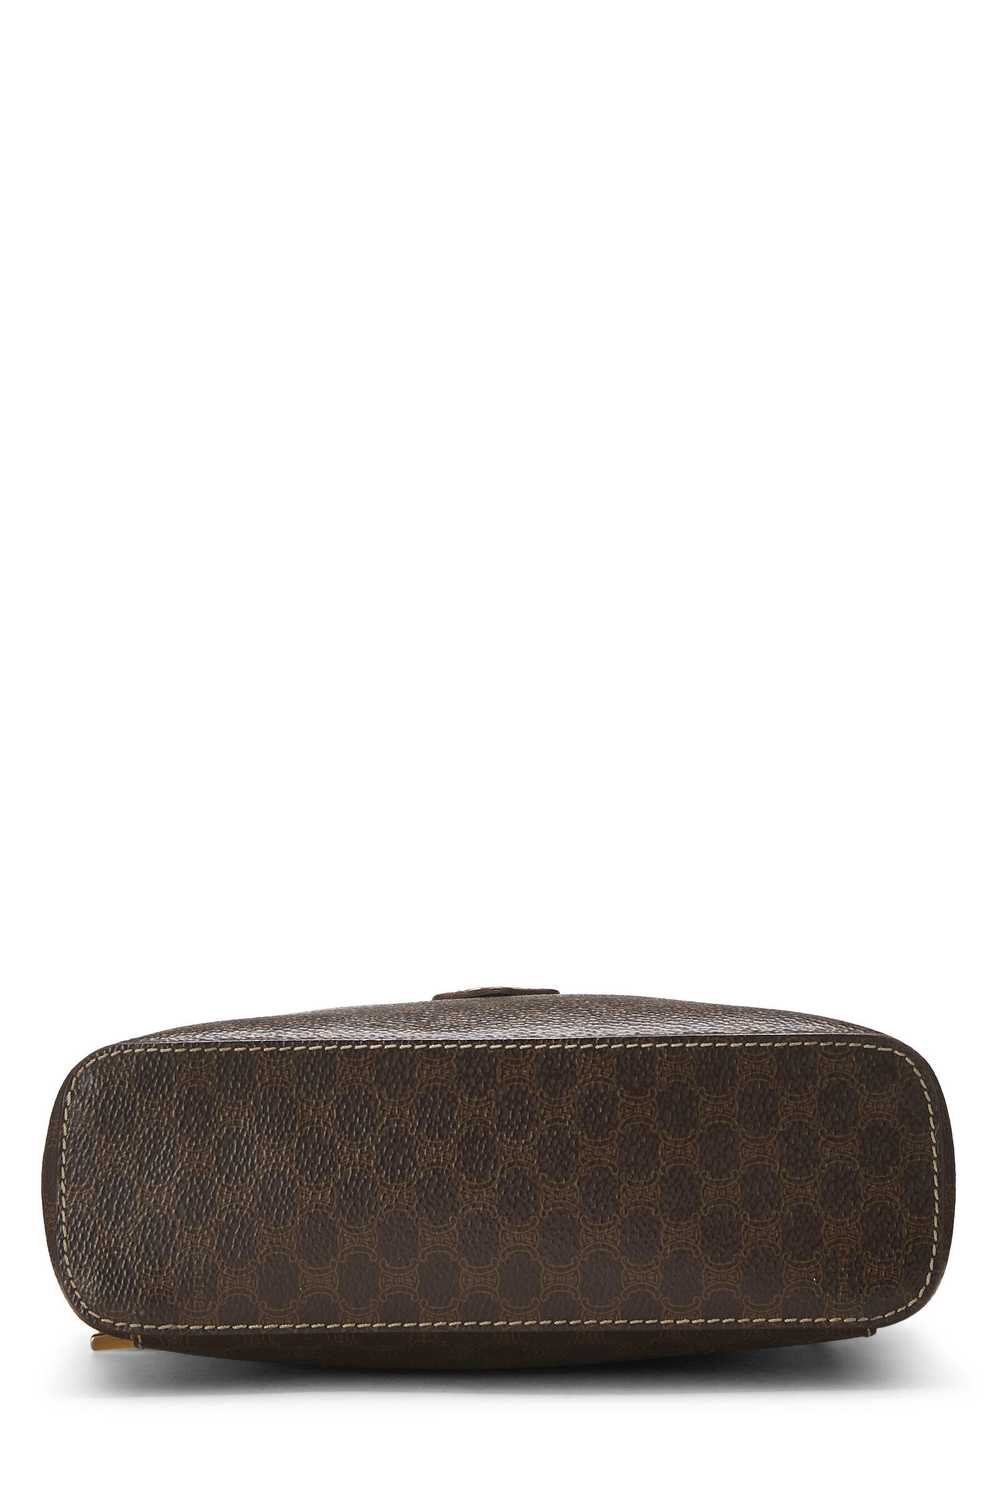 Brown Coated Canvas Macadam Toiletry Bag - image 5